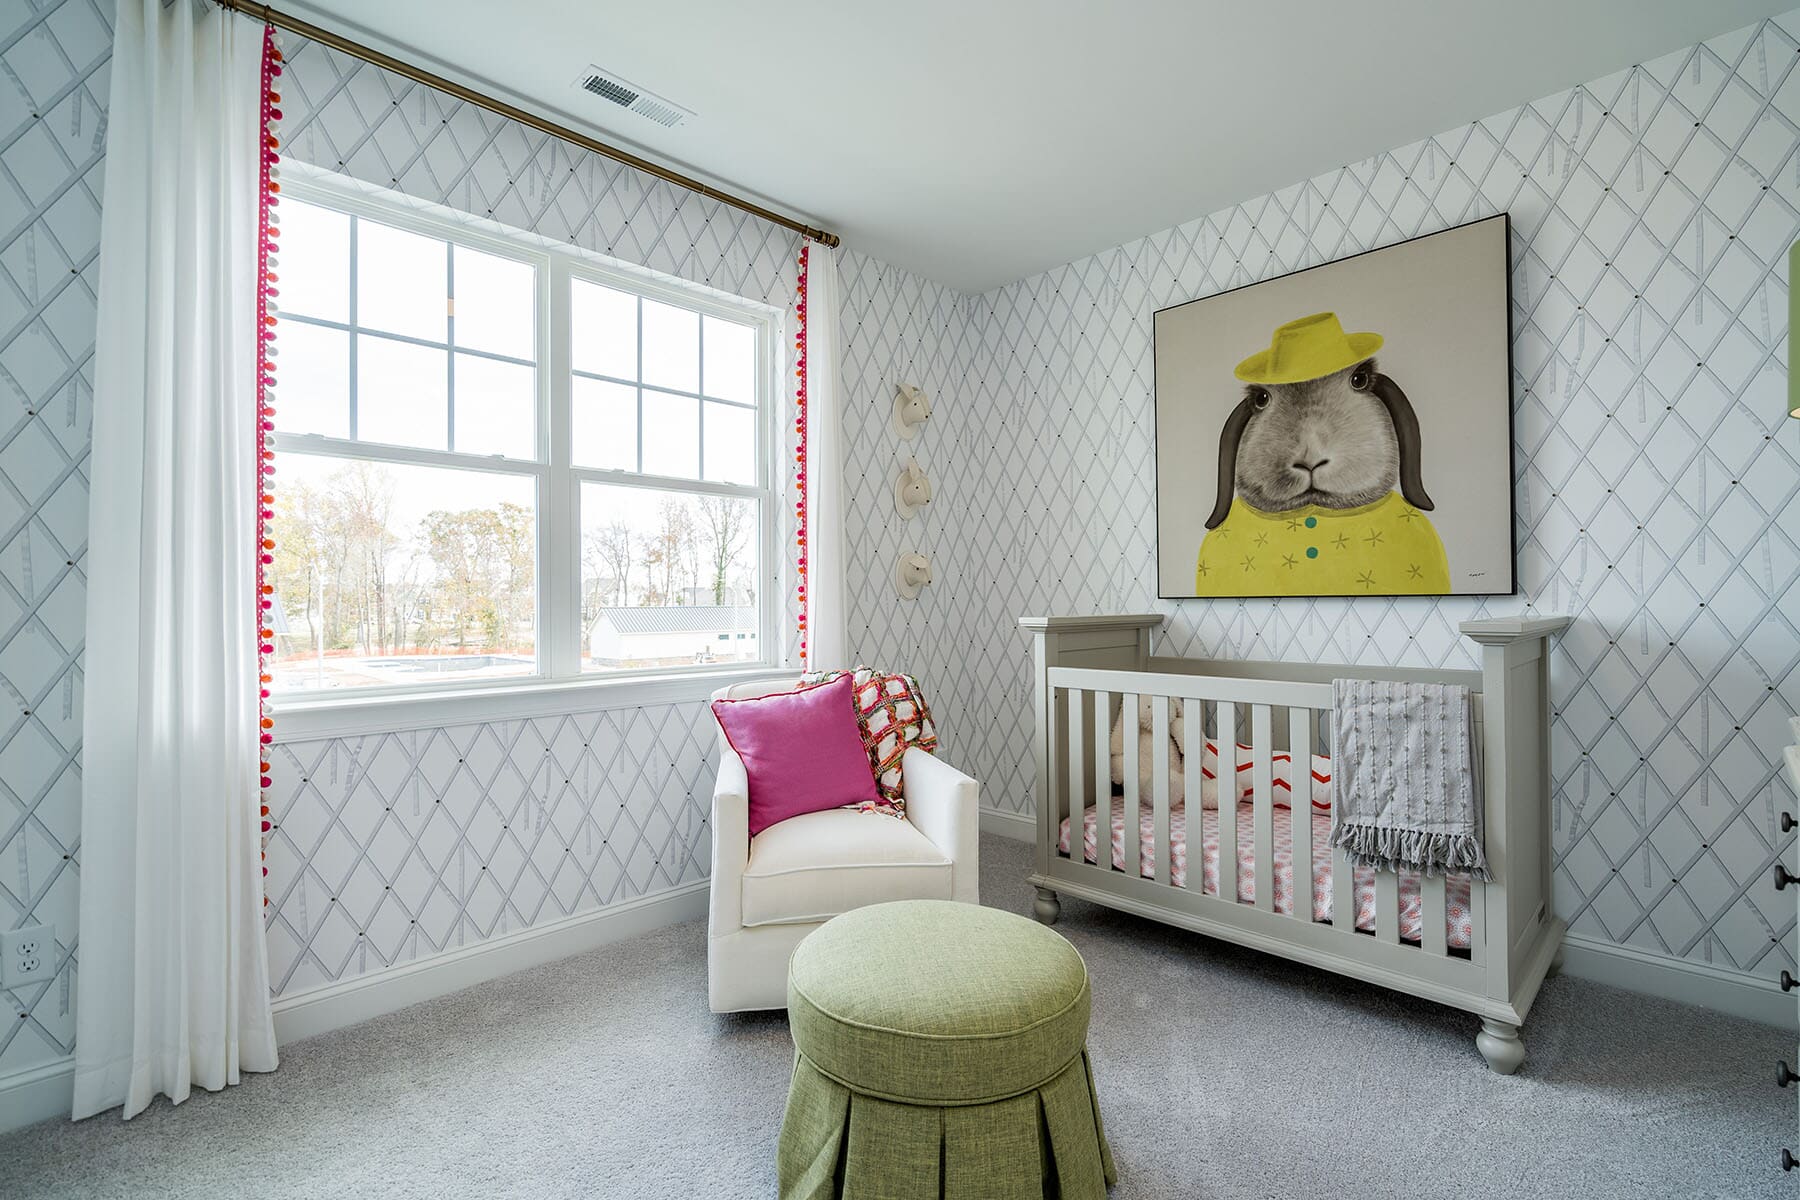 A Nursery Room With Wallpaper